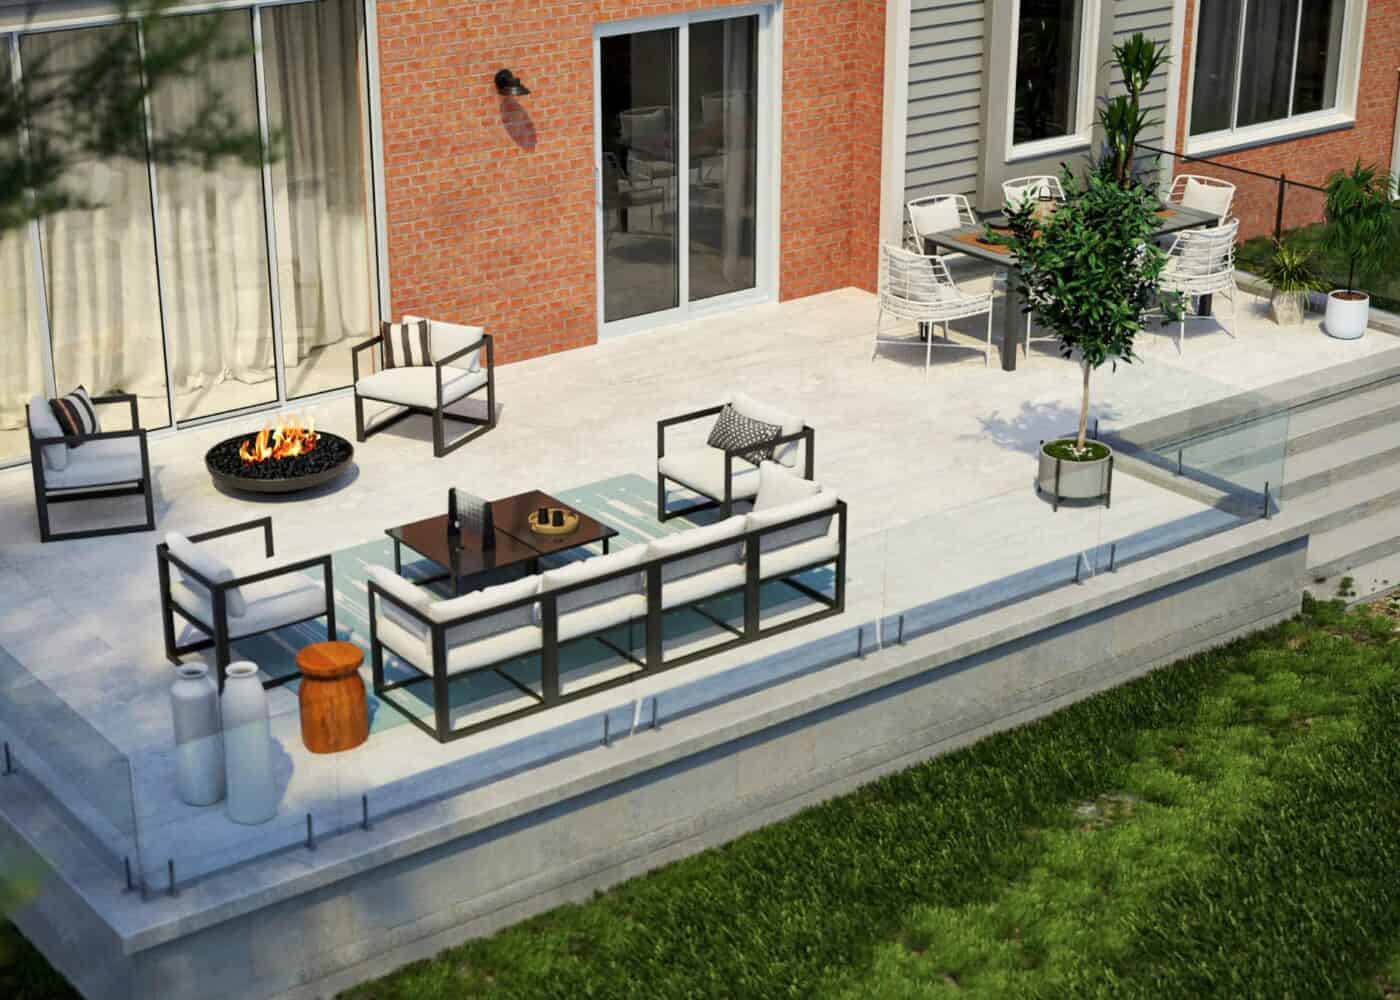 1 Room, 2 Looks: Fix This Outdoor Space!